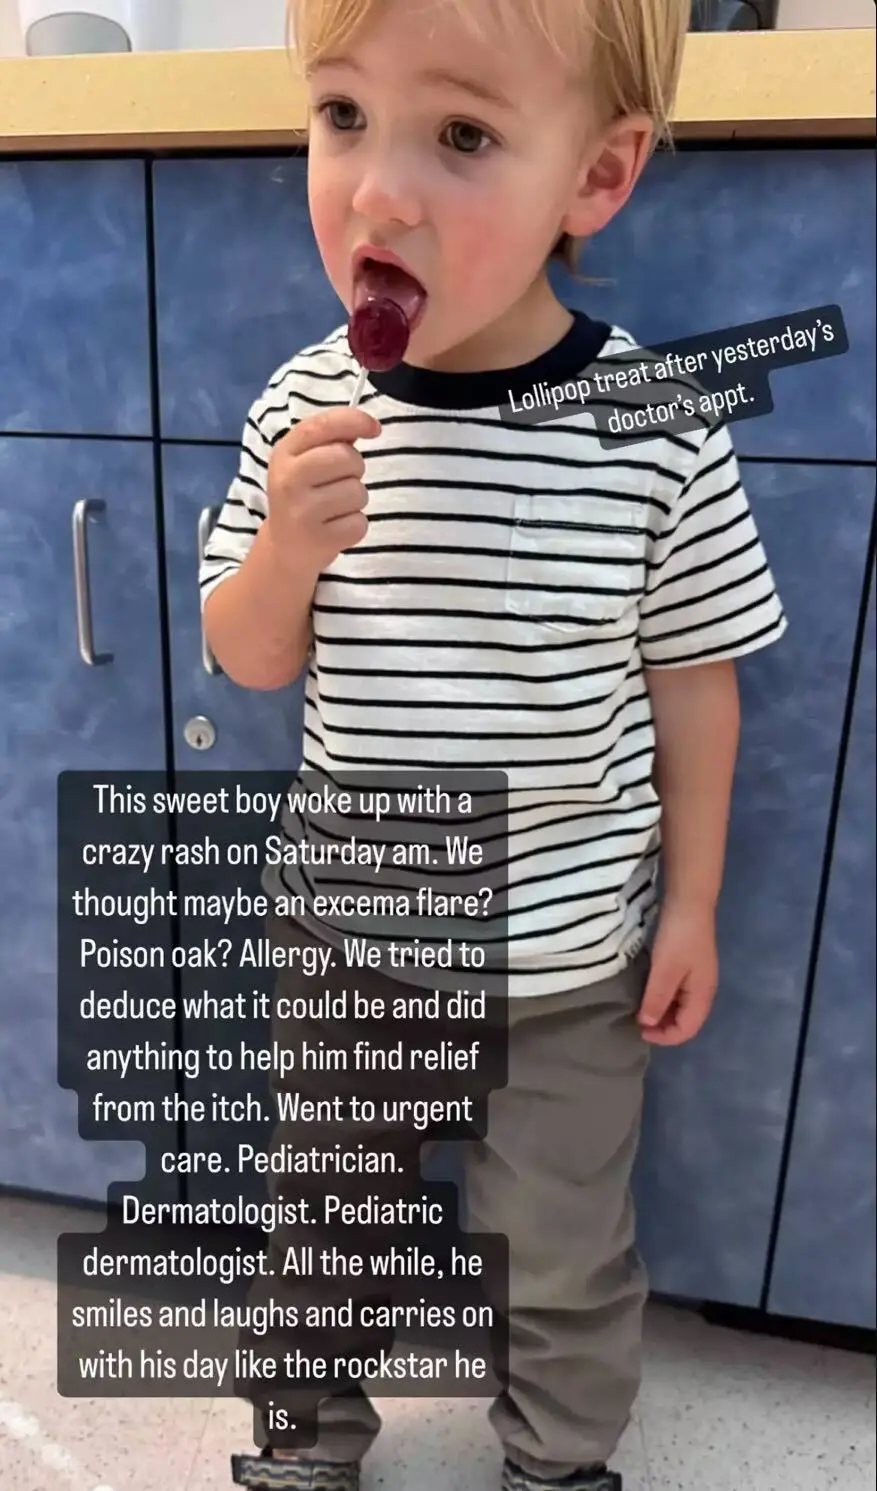 mandy moores ig photo of son gus licking a lollipop